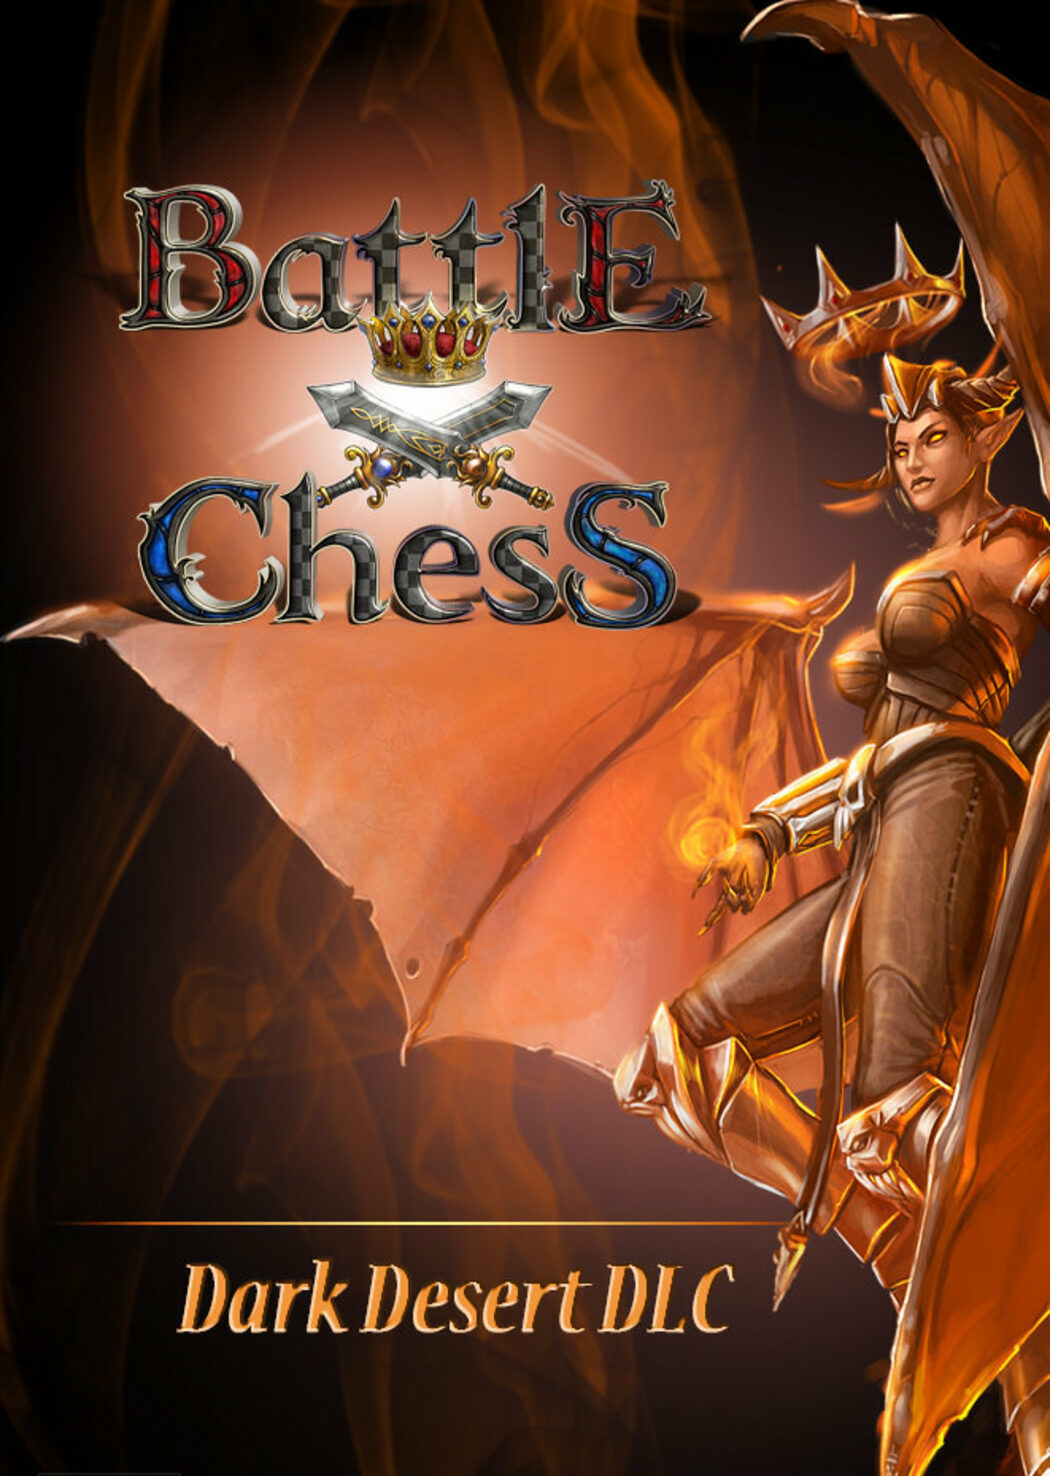 Battle vs Chess - Floating Island DLC, PC Steam Downloadable Content